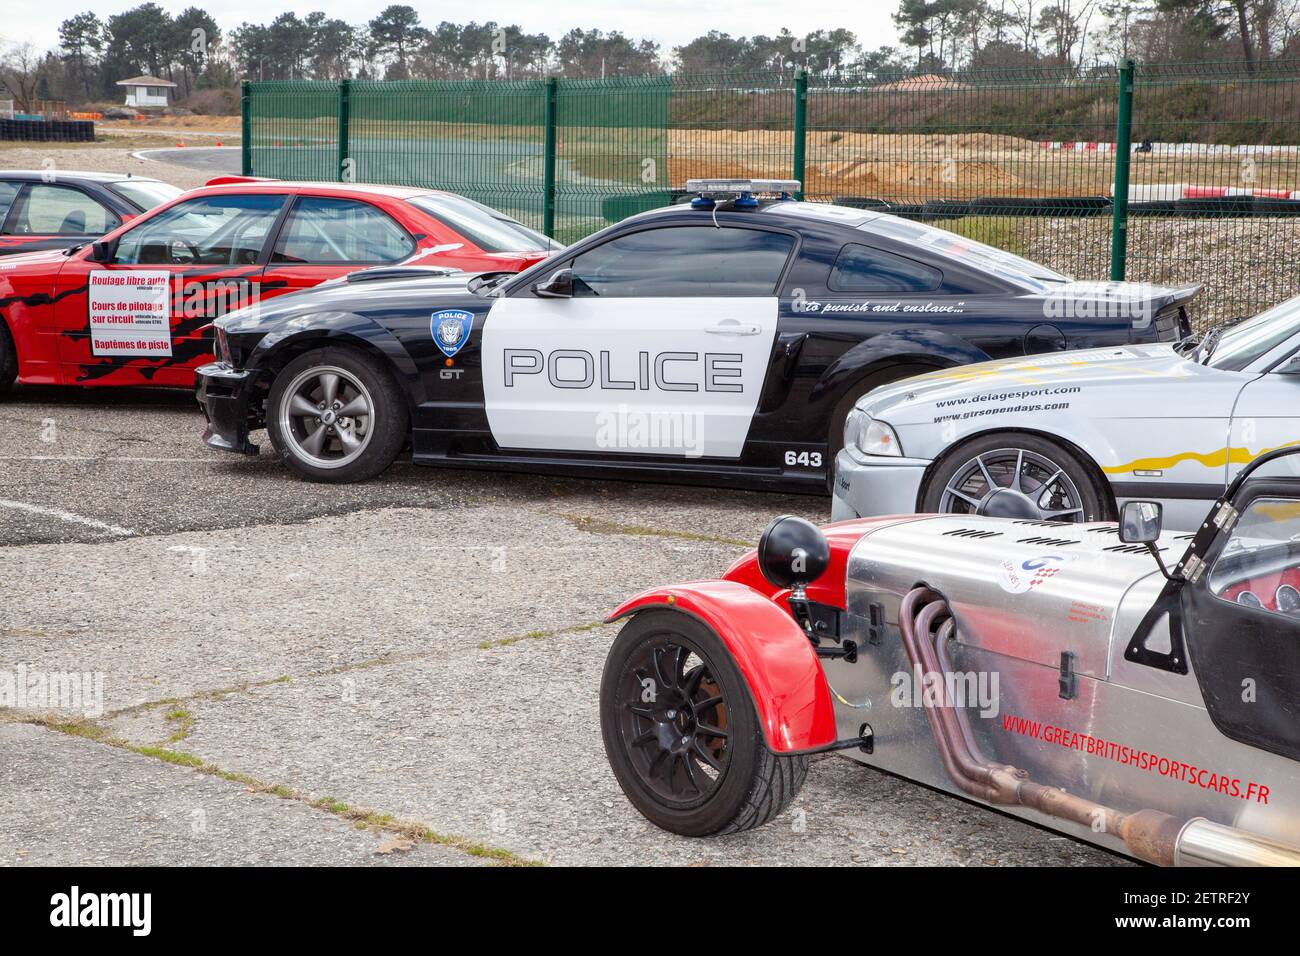 Bordeaux , Aquitaine  France - 12 28 2020 : Ford Mustang police car Transformers Film with bmw and lotus 7 caterham seven in racing car show race Stock Photo